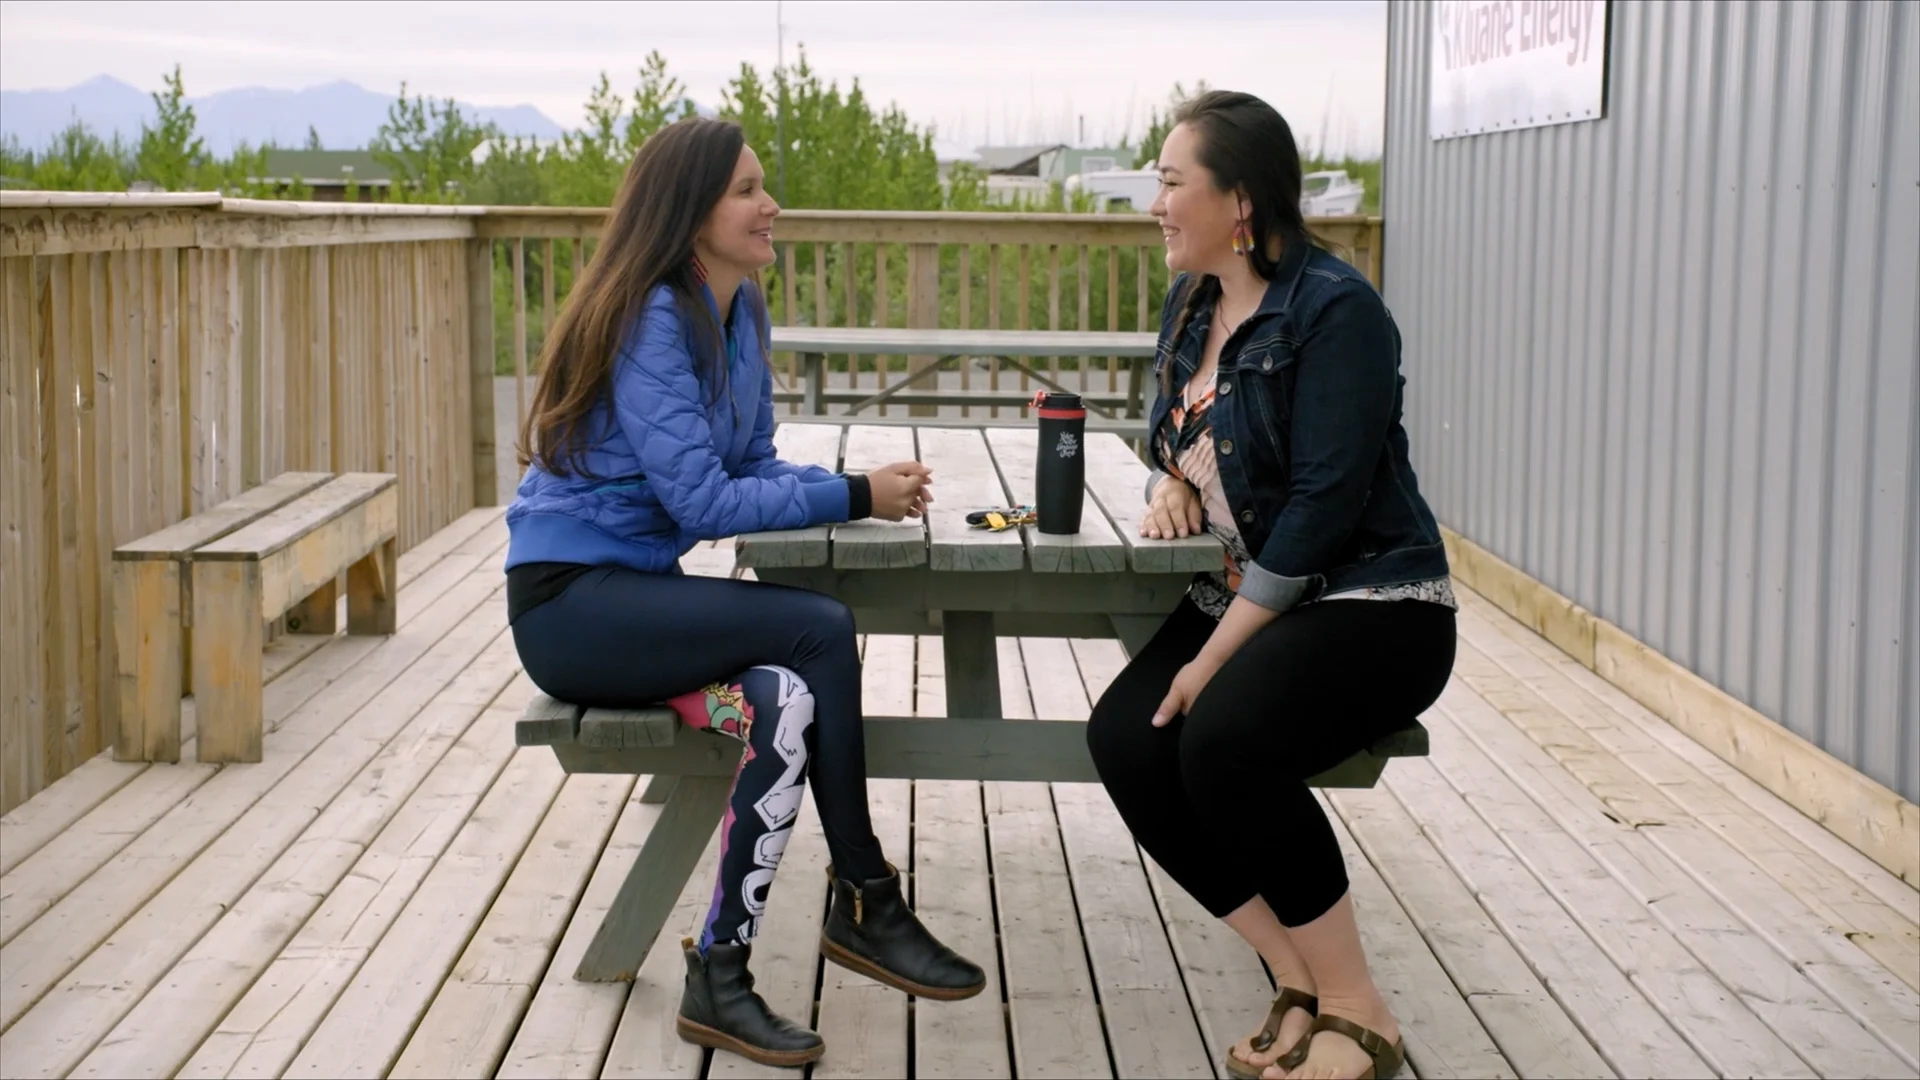 Melina Laboucan-Massimo (left) and Diyet Van Lieshout (right) in Kluane, Yukon. (Power to the People)